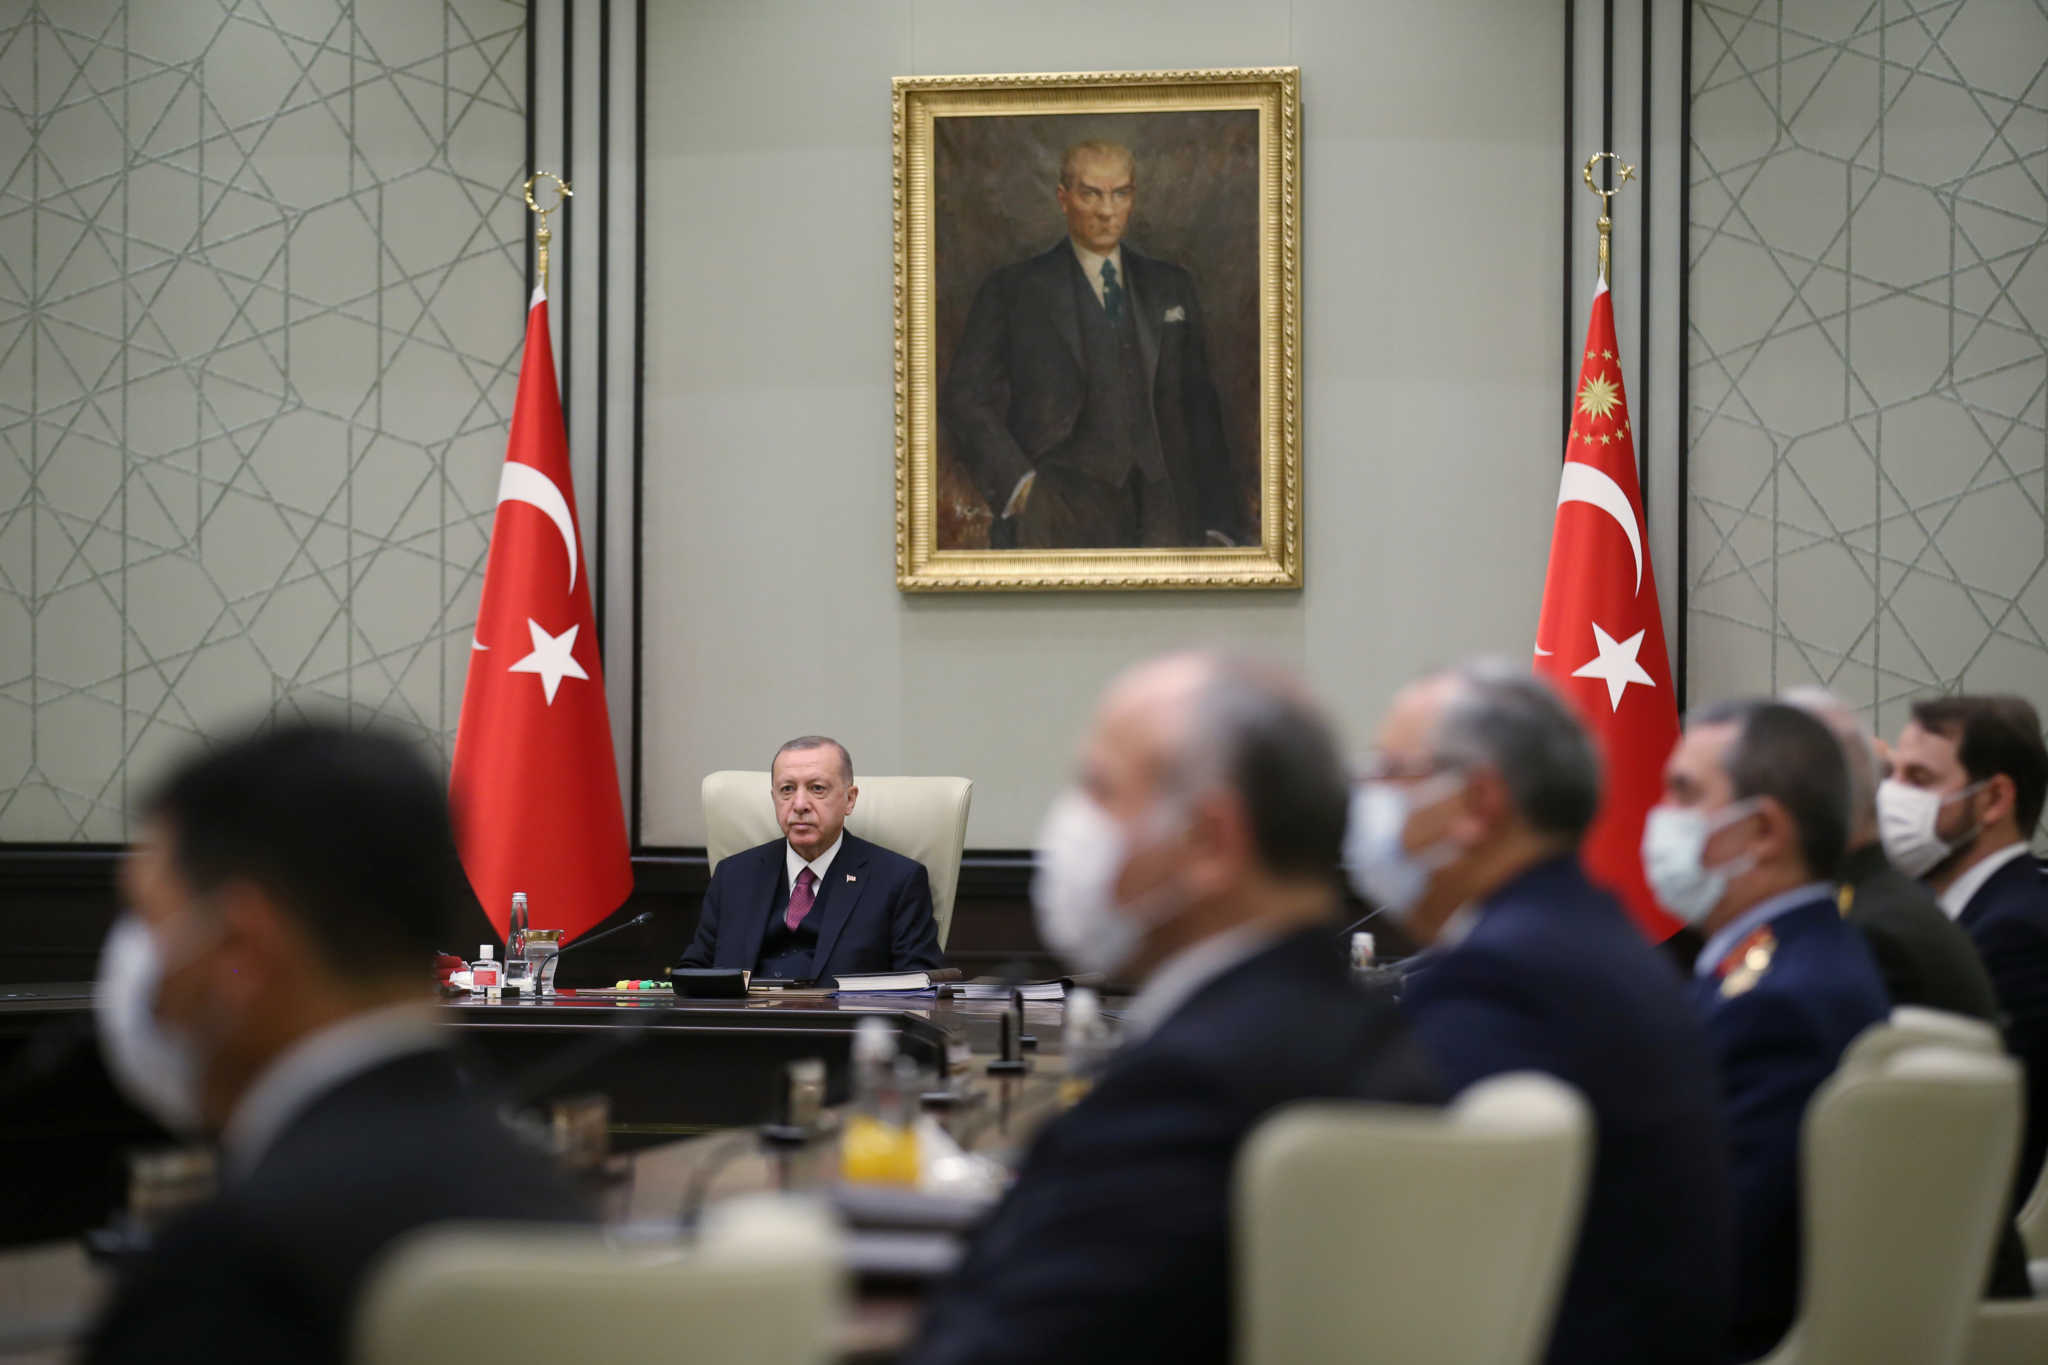 Turkish President Tayyip Erdogan chairs a meeting of the National Security Council in Ankara, Turkey September 24, 2020. Presidential Press Office/Handout via REUTERS ATTENTION EDITORS - THIS PICTURE WAS PROVIDED BY A THIRD PARTY. NO RESALES. NO ARCHIVE.